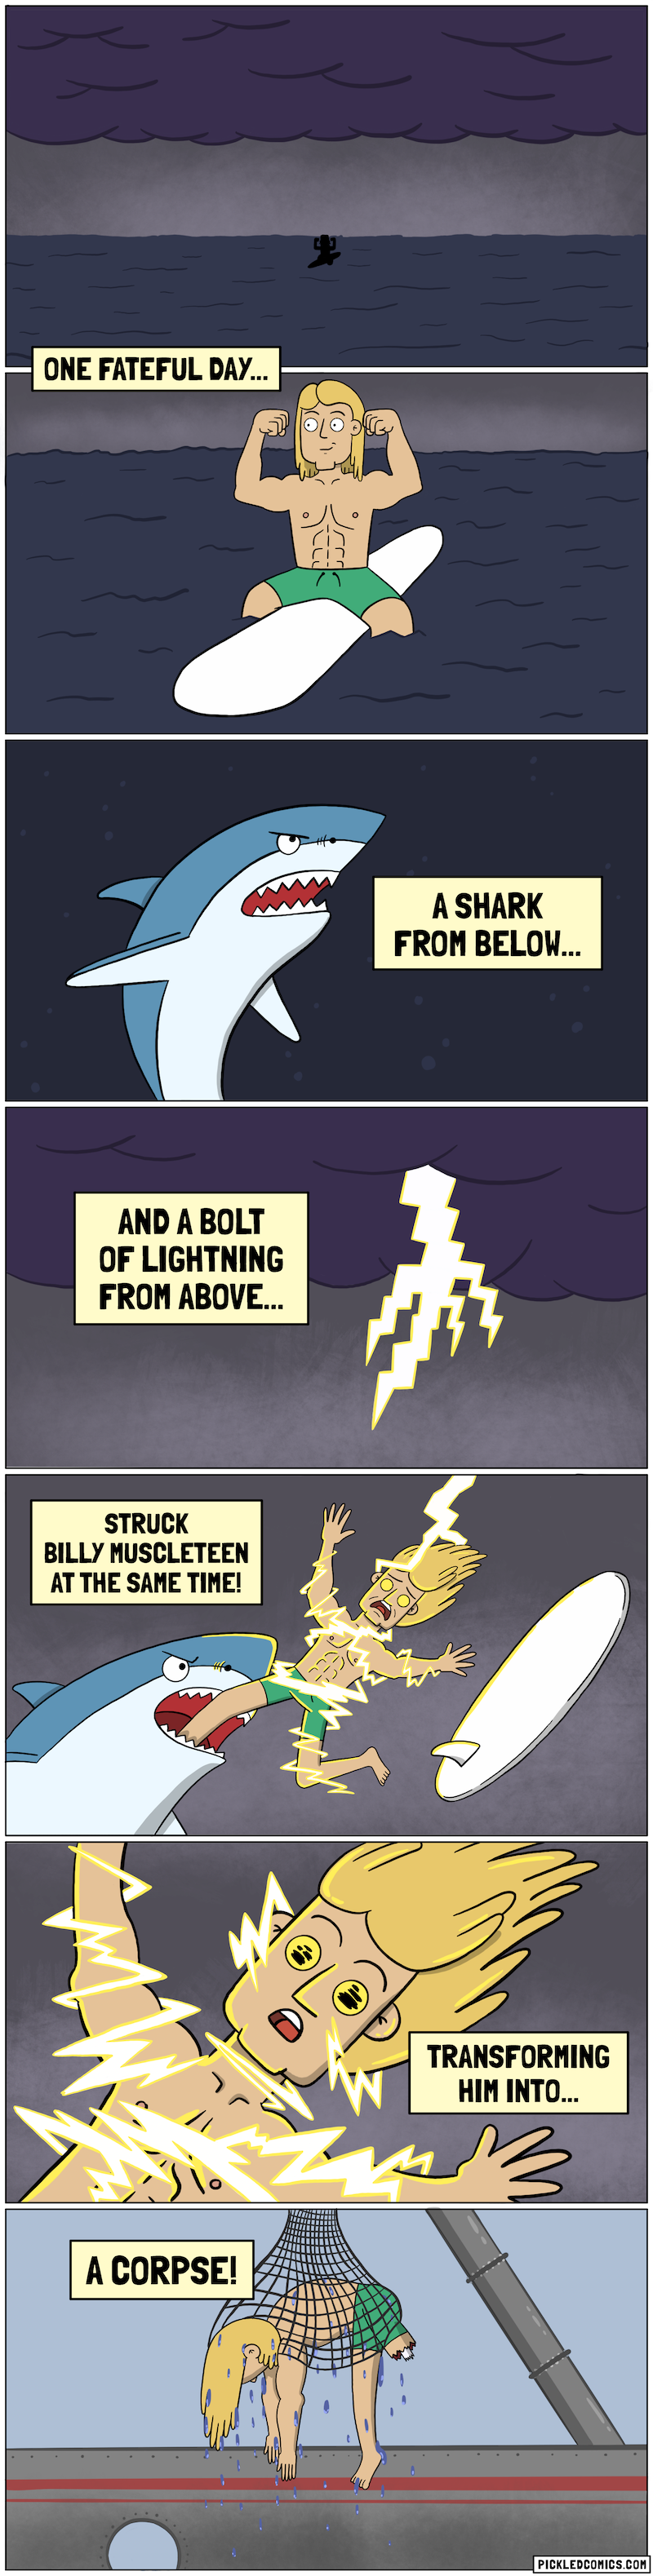 One fateful day, a shark from below and a bolt of lightning from above struck Billy Muscleteen at the same time! Transforming him into... a corpse!